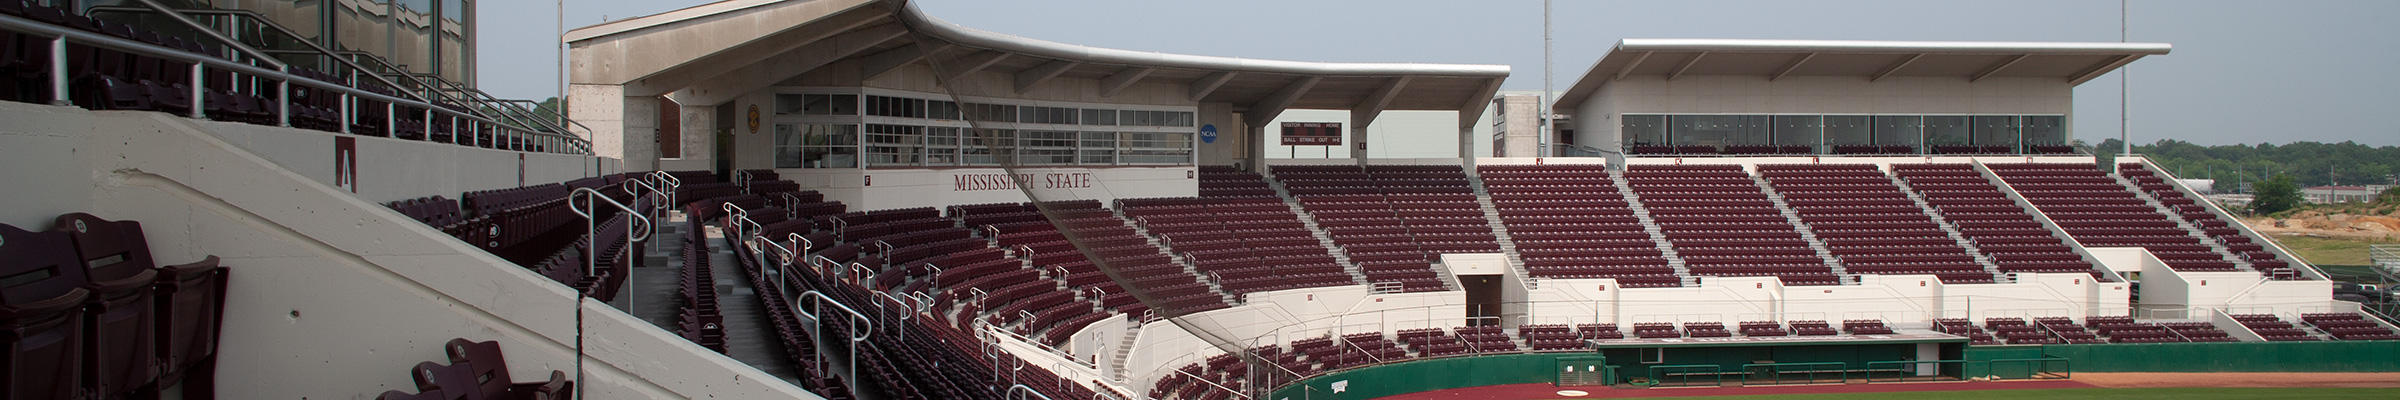 Dudy Noble Mississippi State University spectator seating